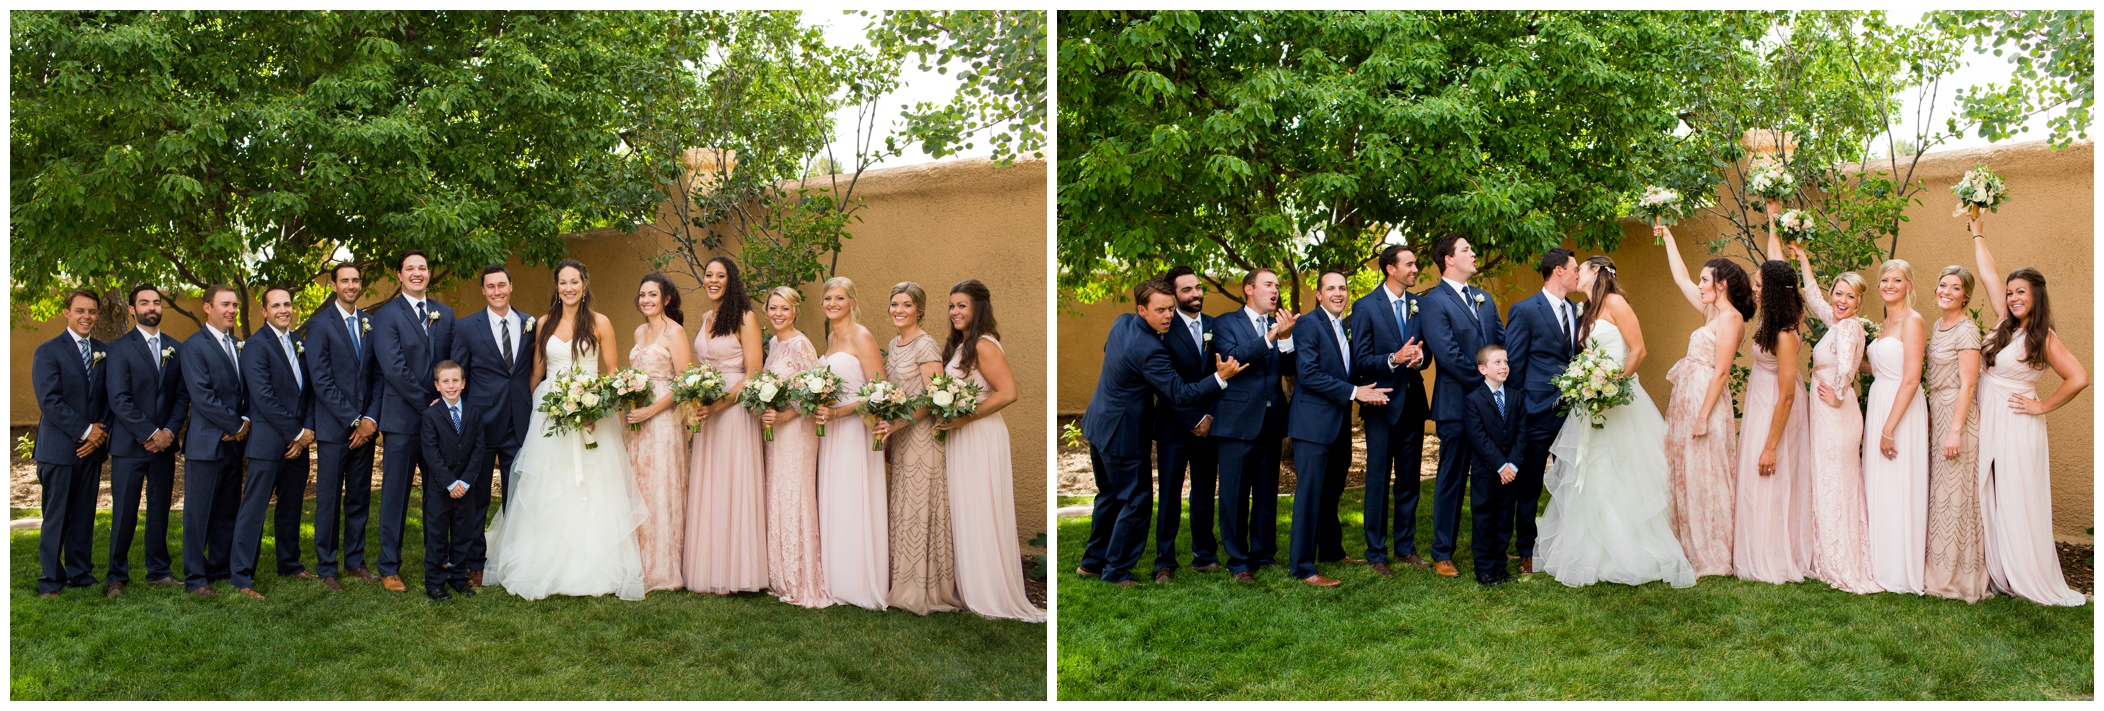 blue and pink wedding party at Villa Parker Colorado during the summer